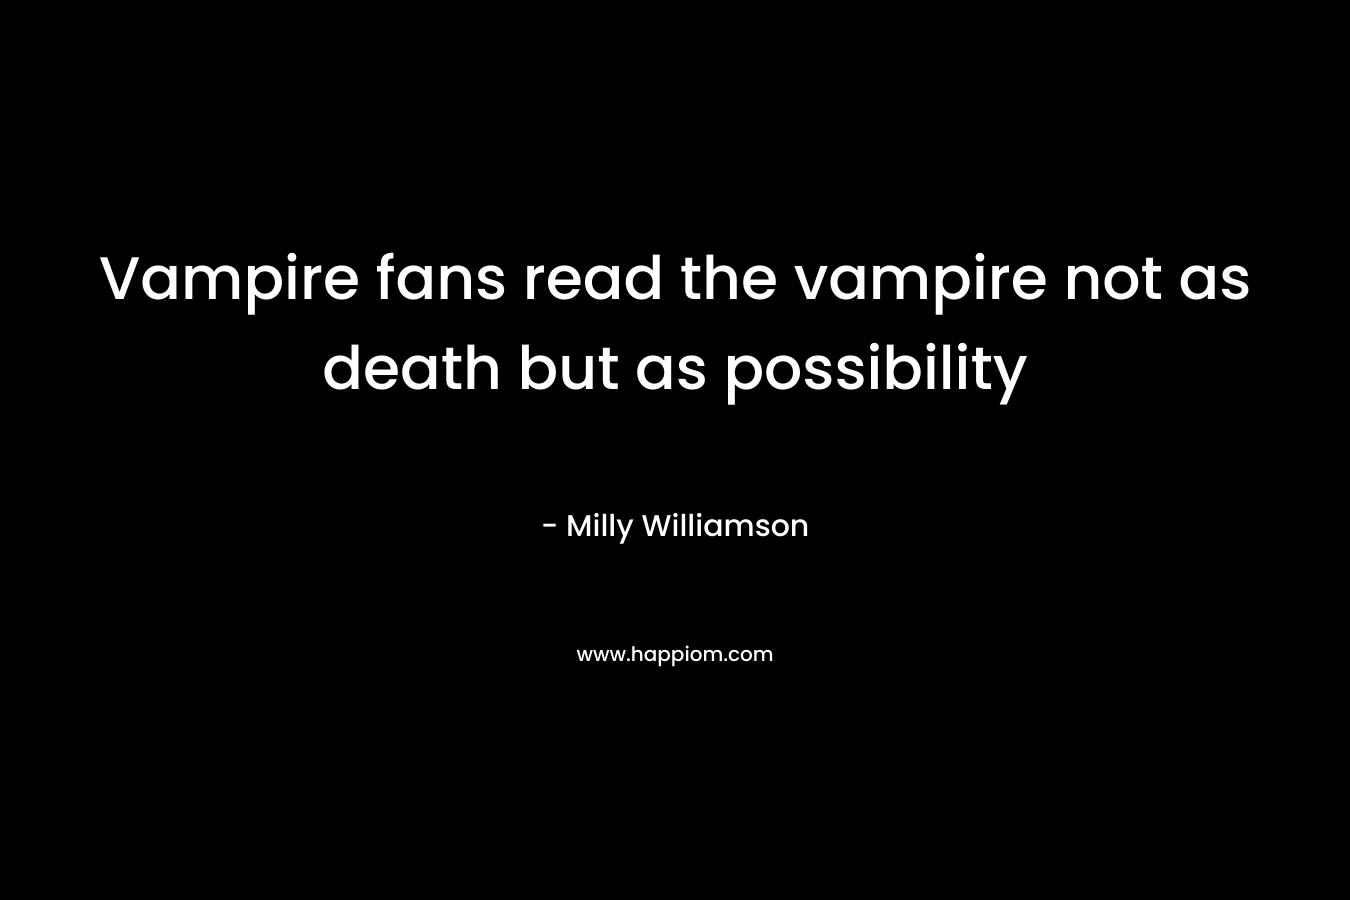 Vampire fans read the vampire not as death but as possibility – Milly Williamson